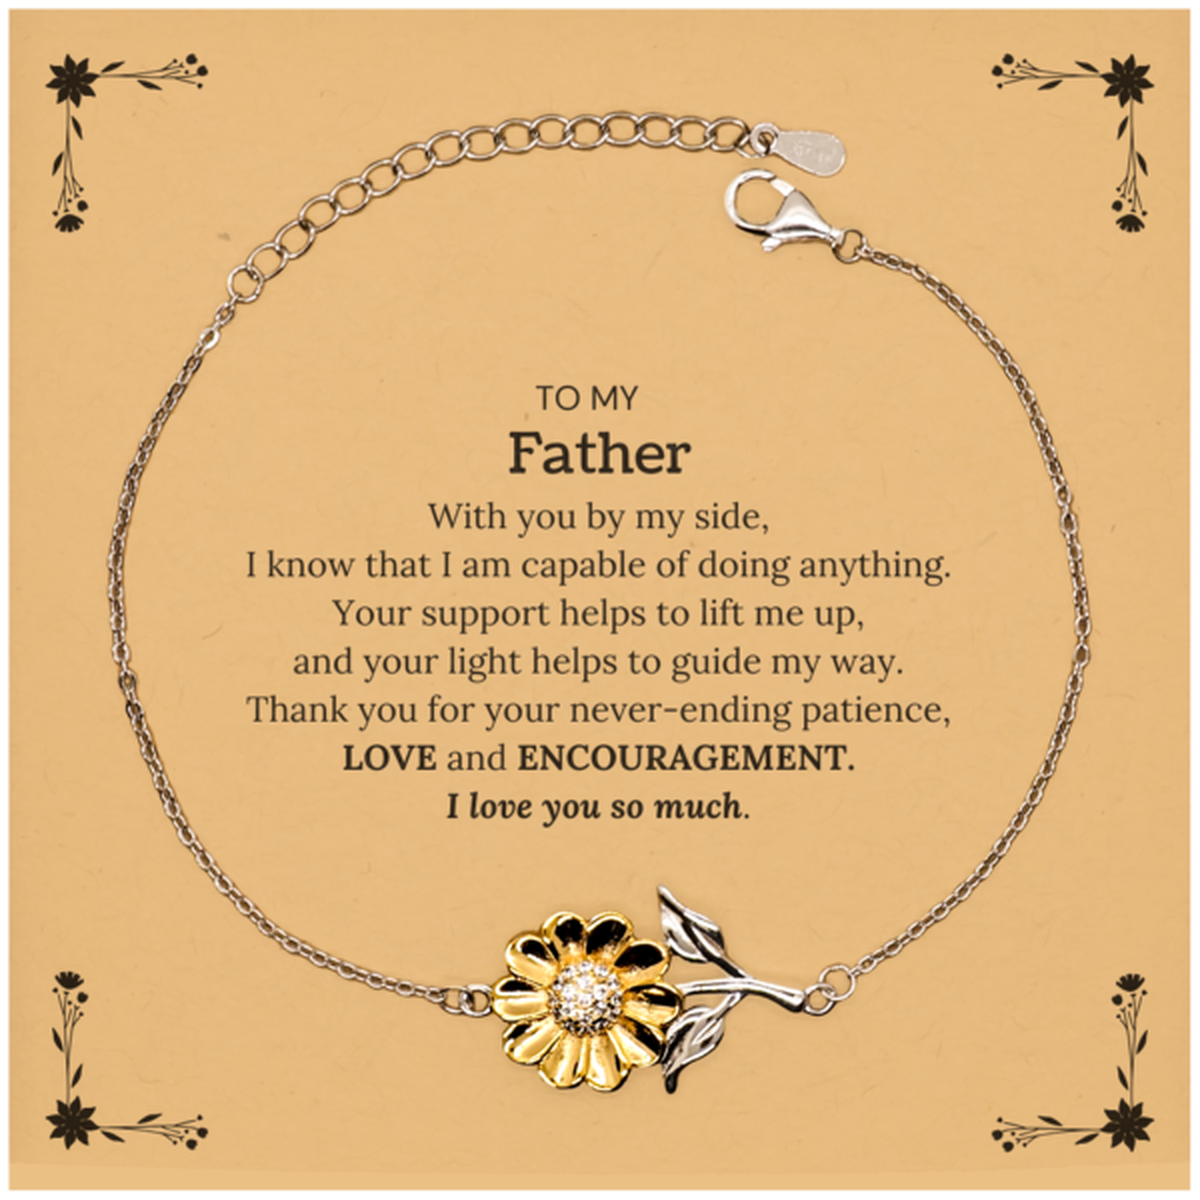 Appreciation Father Sunflower Bracelet Gifts, To My Father Birthday Christmas Wedding Keepsake Gifts for Father With you by my side, I know that I am capable of doing anything. I love you so much